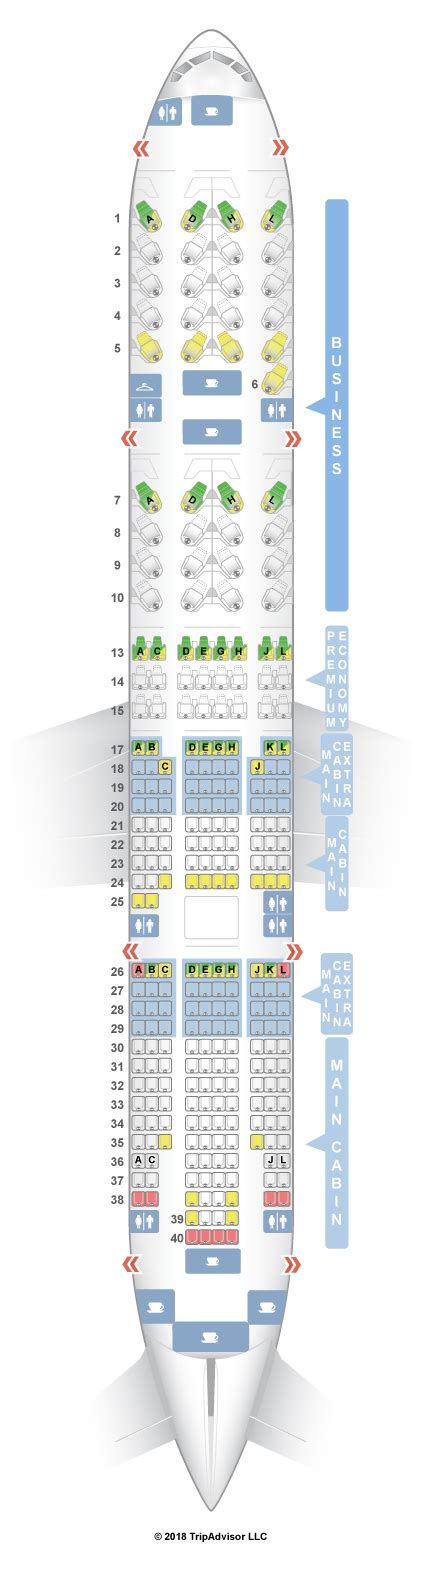 american airlines 777 seating plan